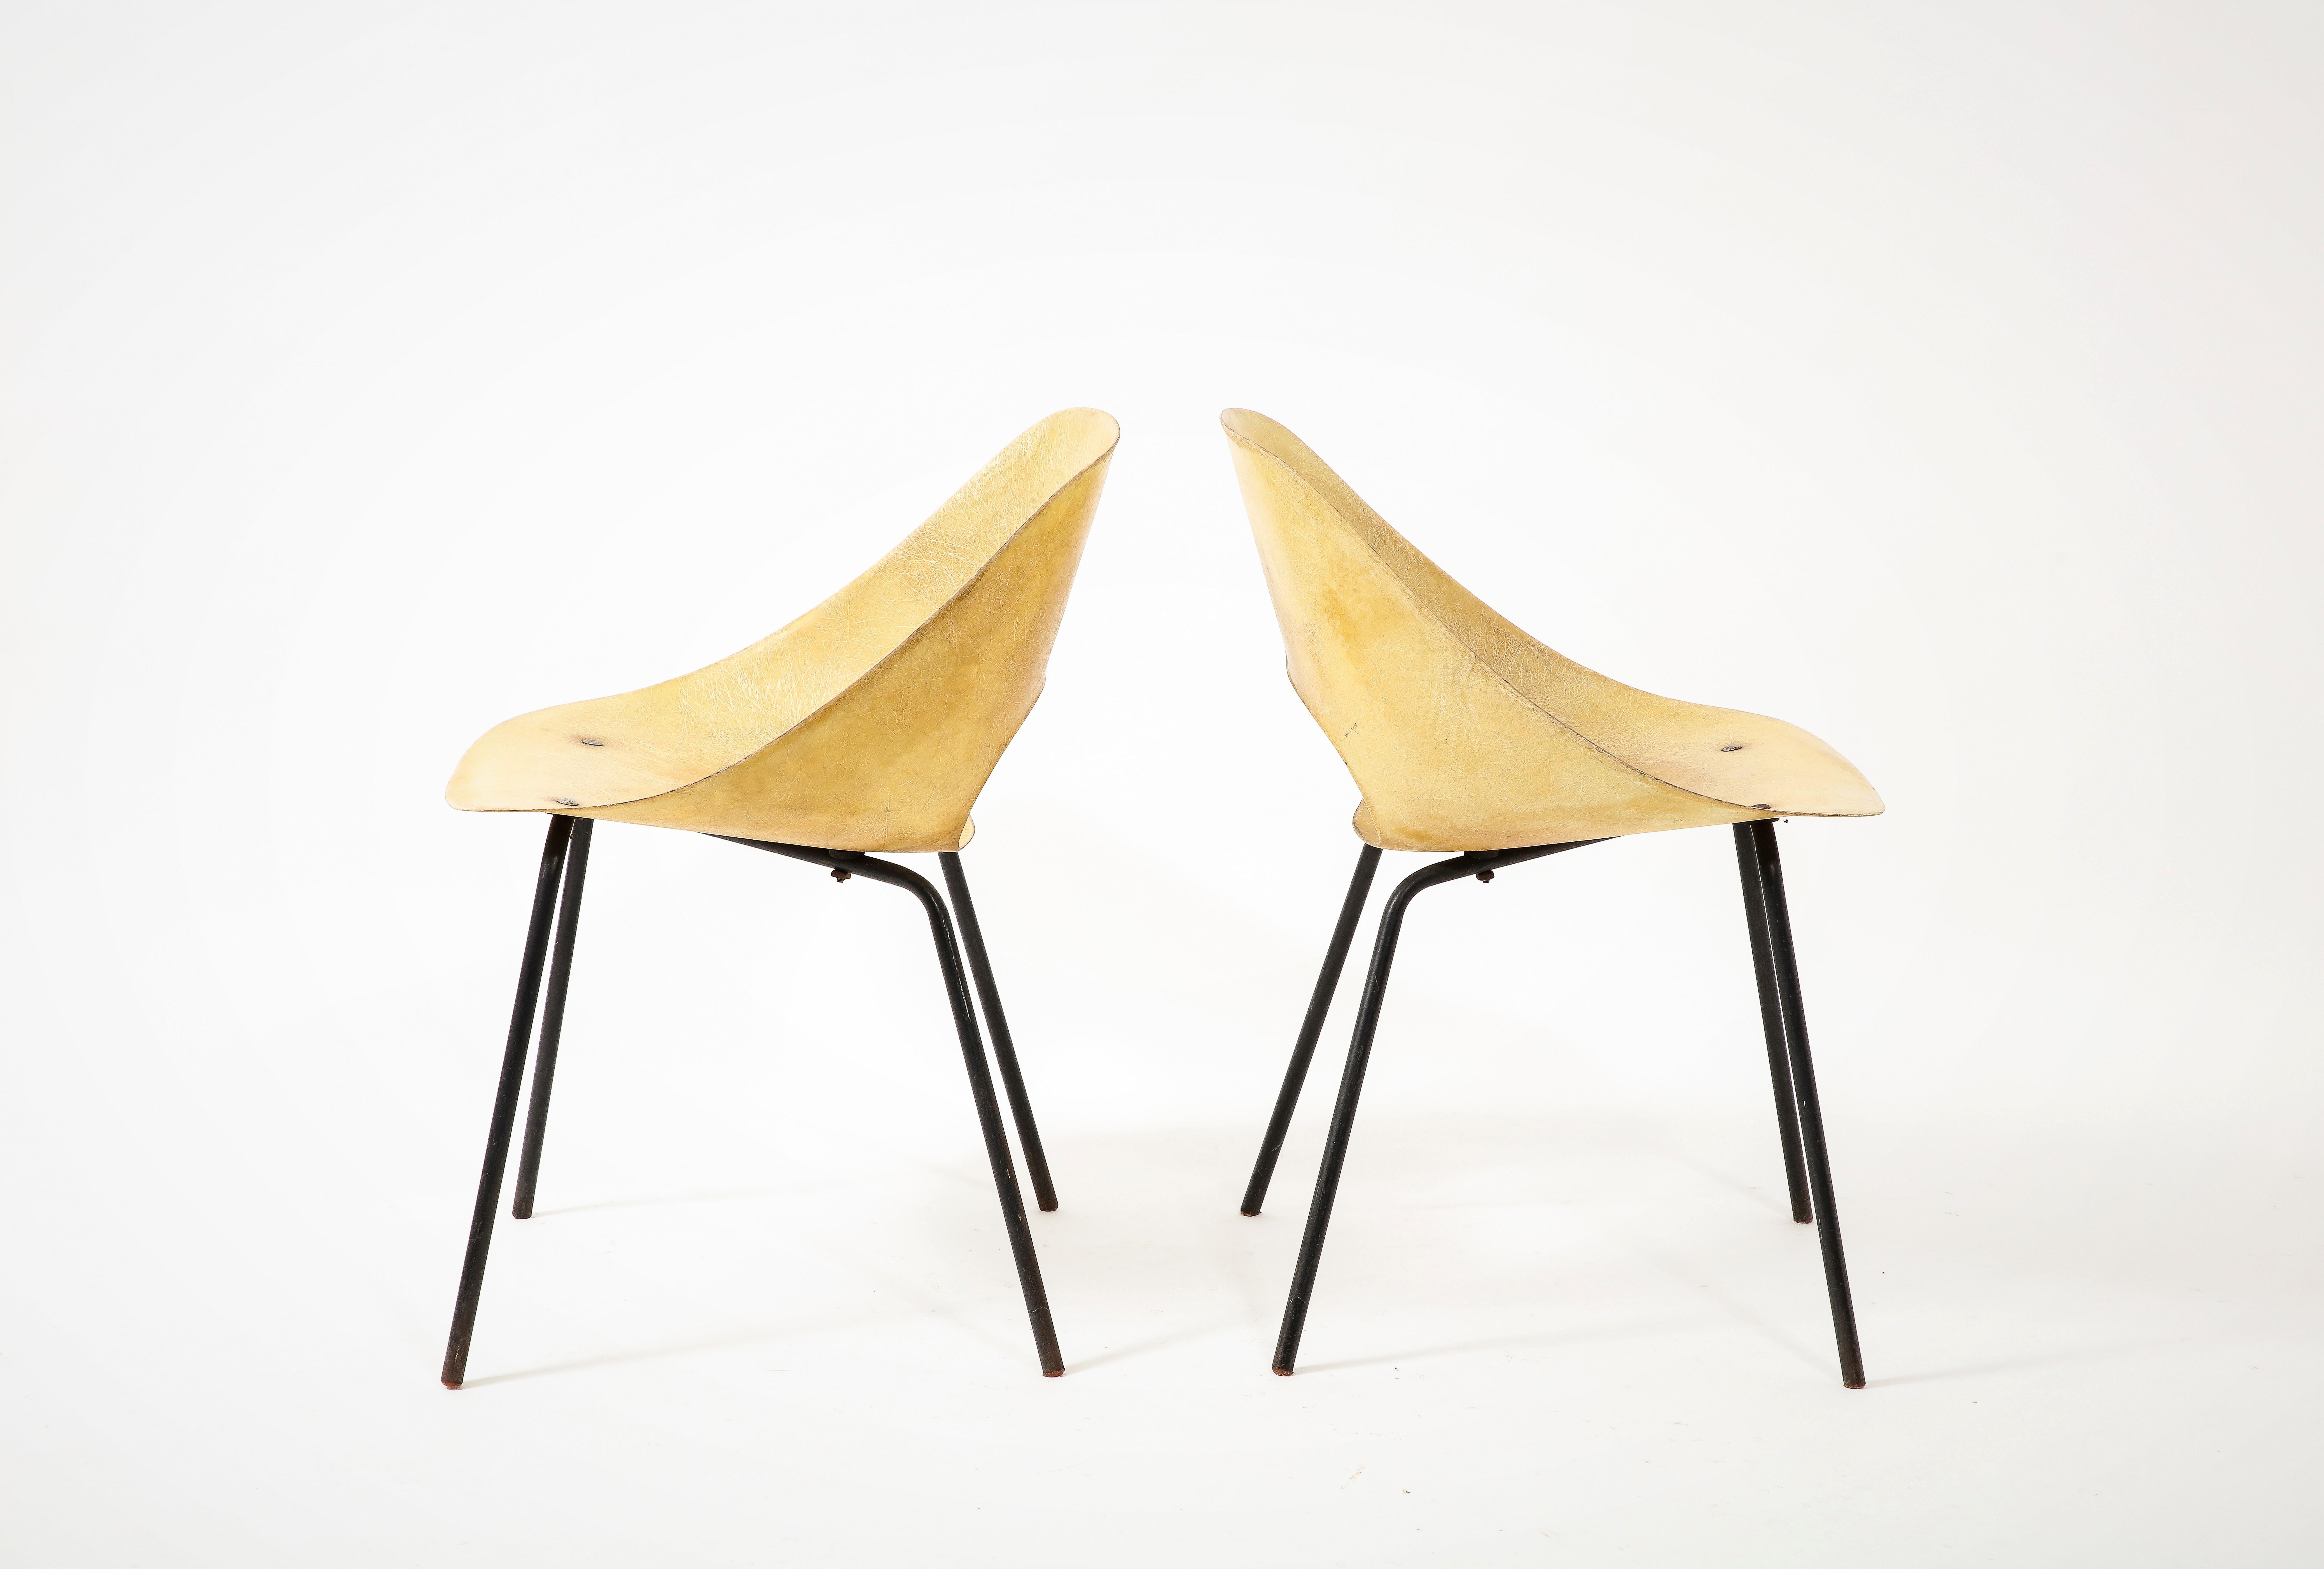 Steel Pair of Pierre Guariche Yellow Fiberglass Side Chairs by Steiner - France 1950's For Sale